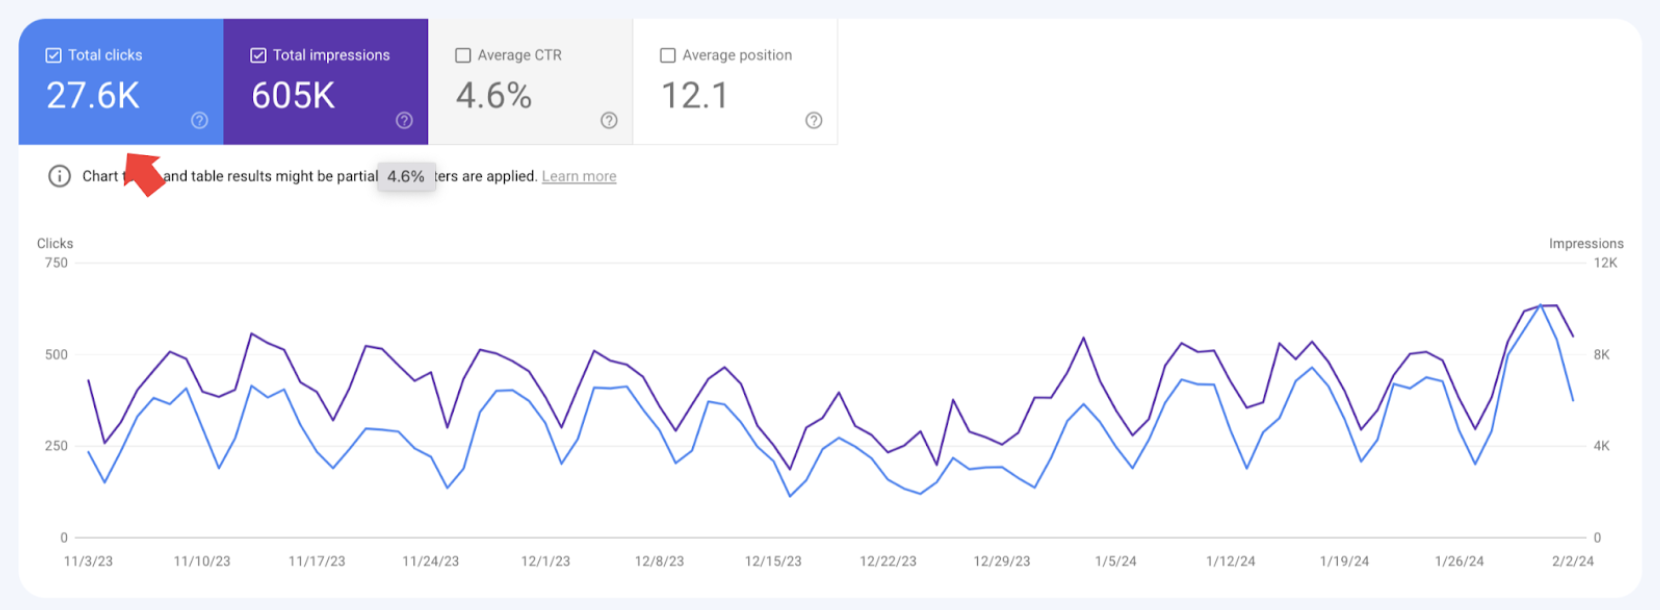 How to see total clicks in Google Search Console